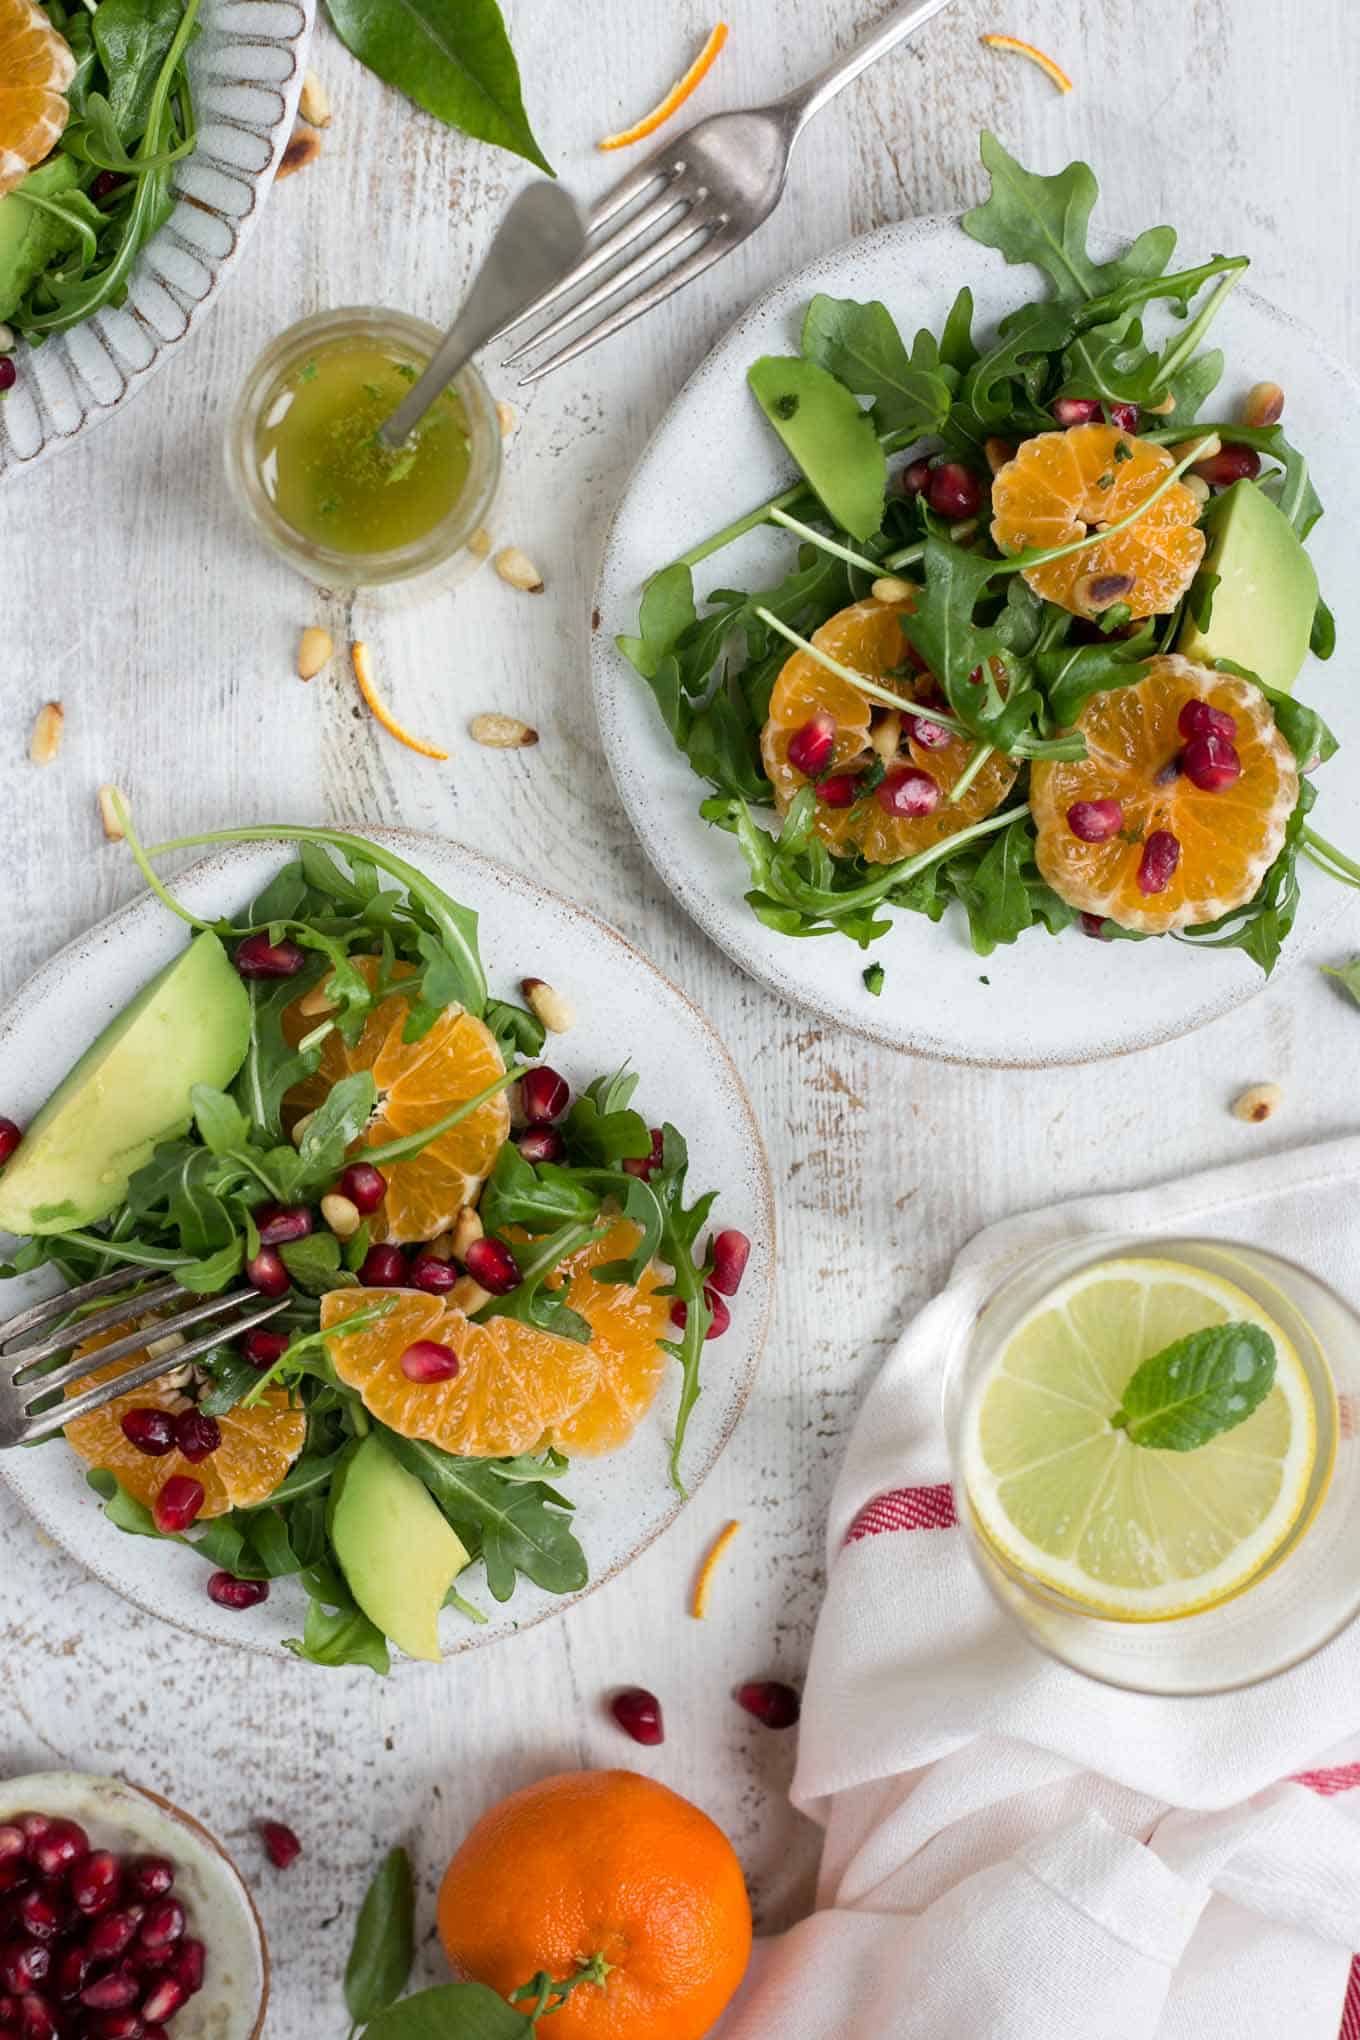 Easy and super- clean clementine salad with avocado and pomegranate #vegan #dairyfree #salad #healthy | via @annabanana.co